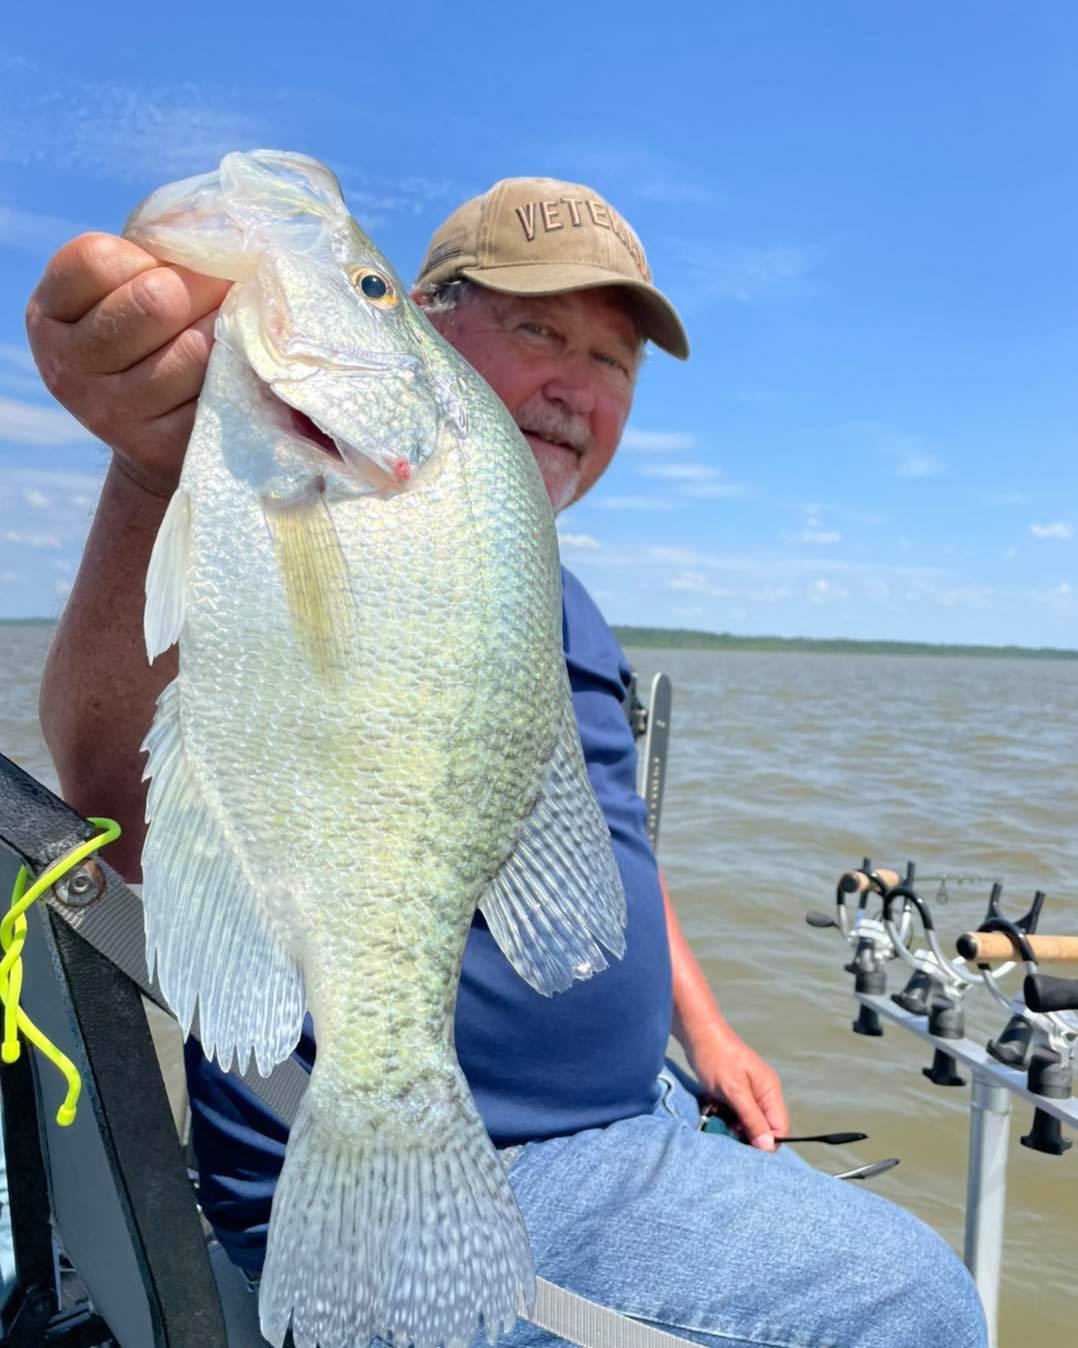 Book Grenada Lake Crappie Fishing on Guidesly